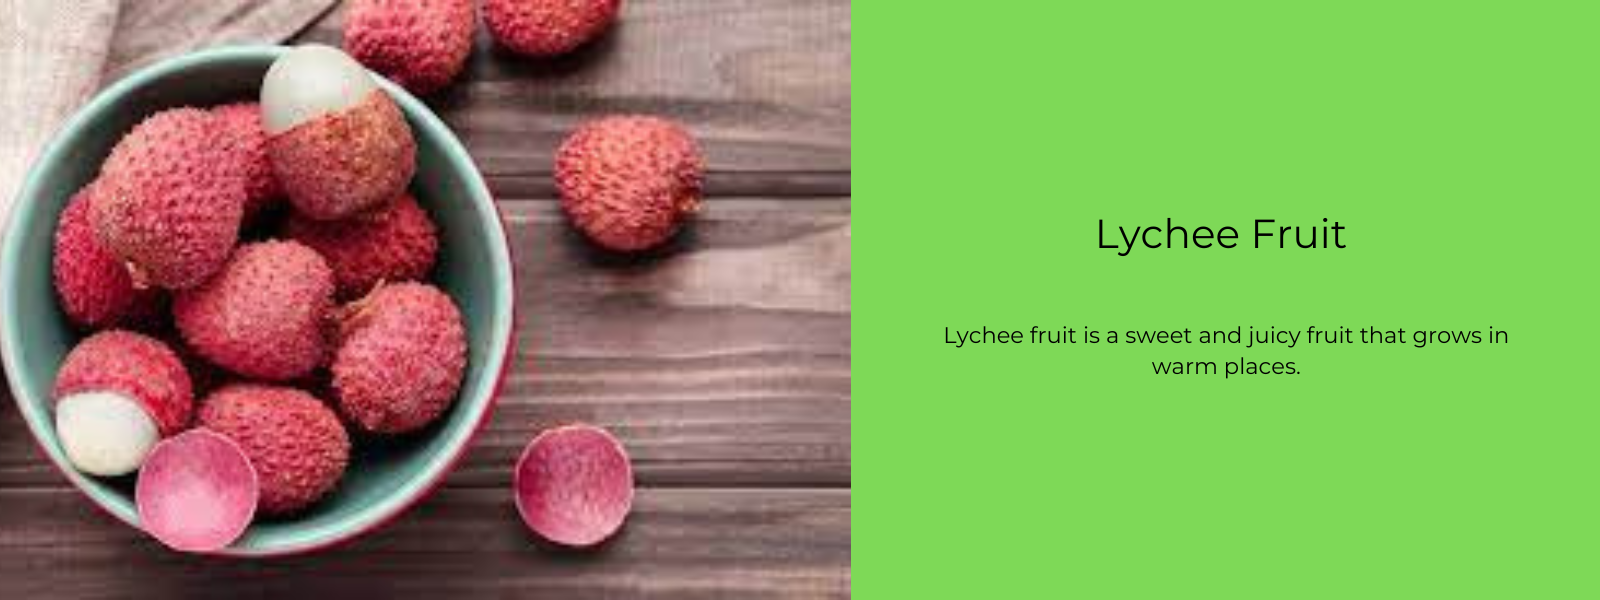 Lychee Fruit - Health Benefits, Uses and Important Facts